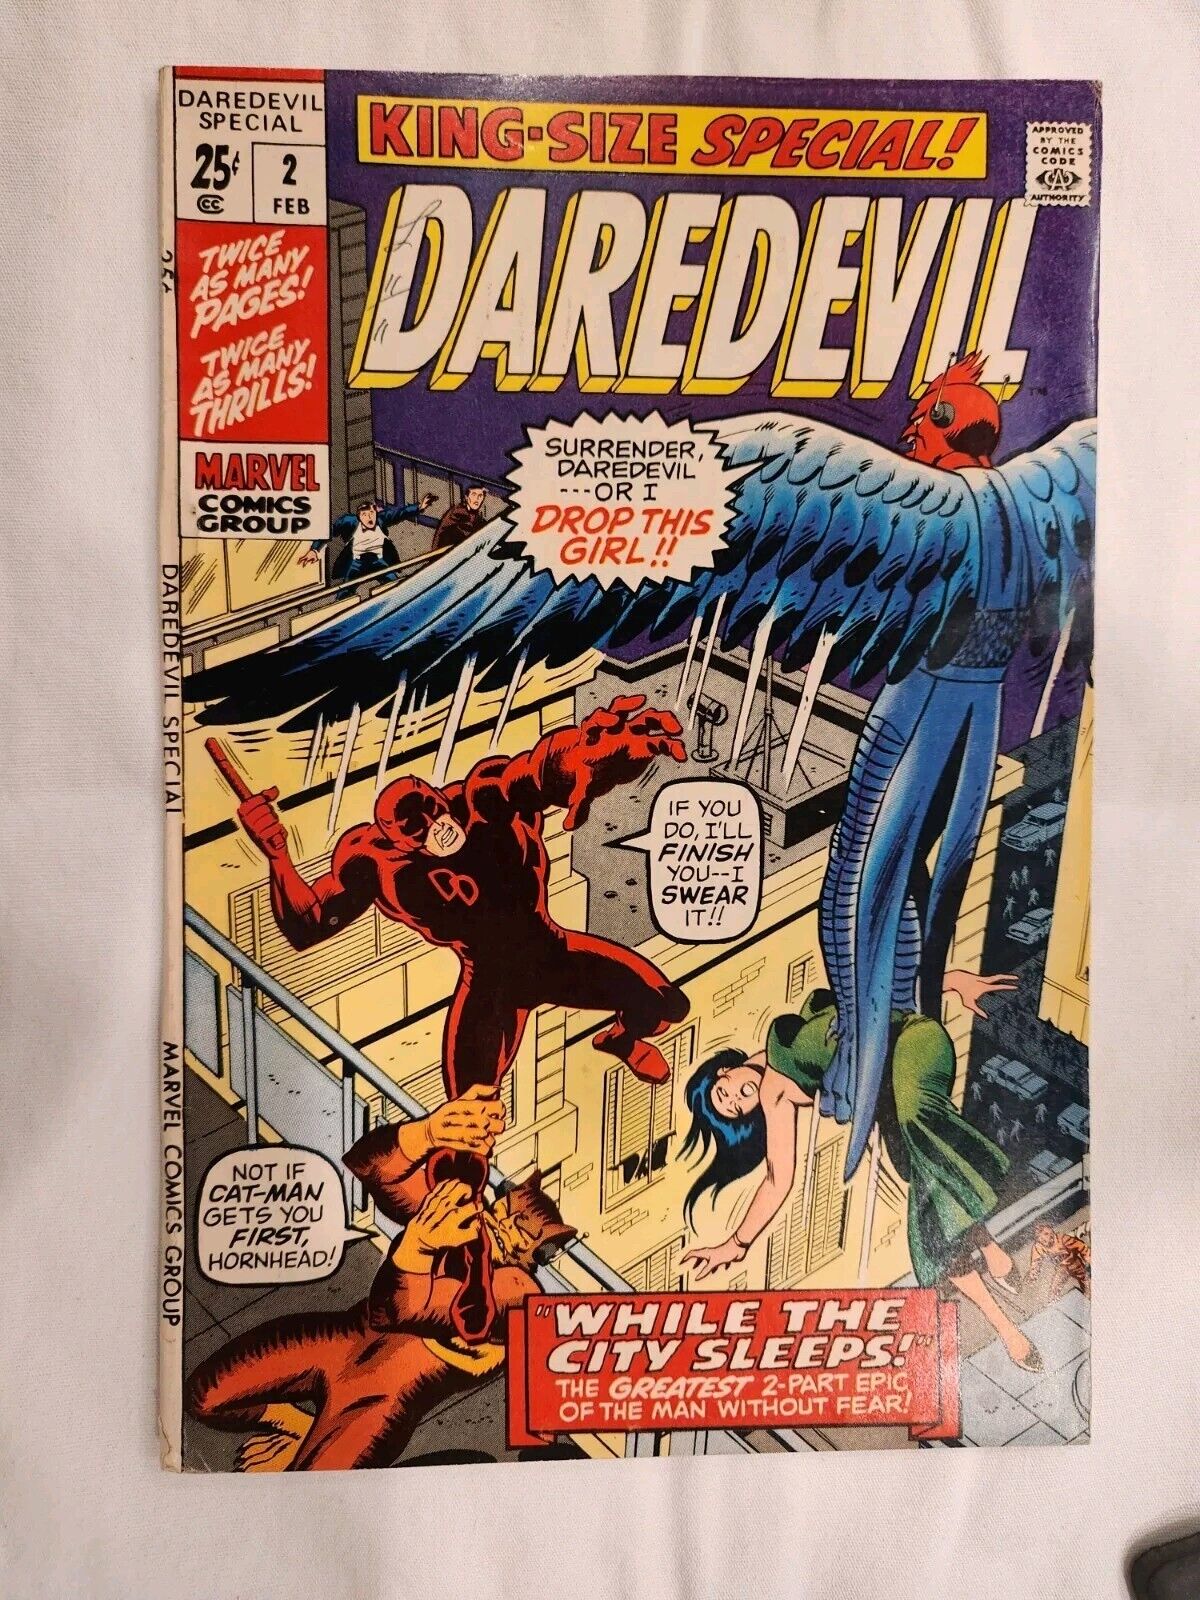 Daredevil King-Size Special #2 Great Looking Copy